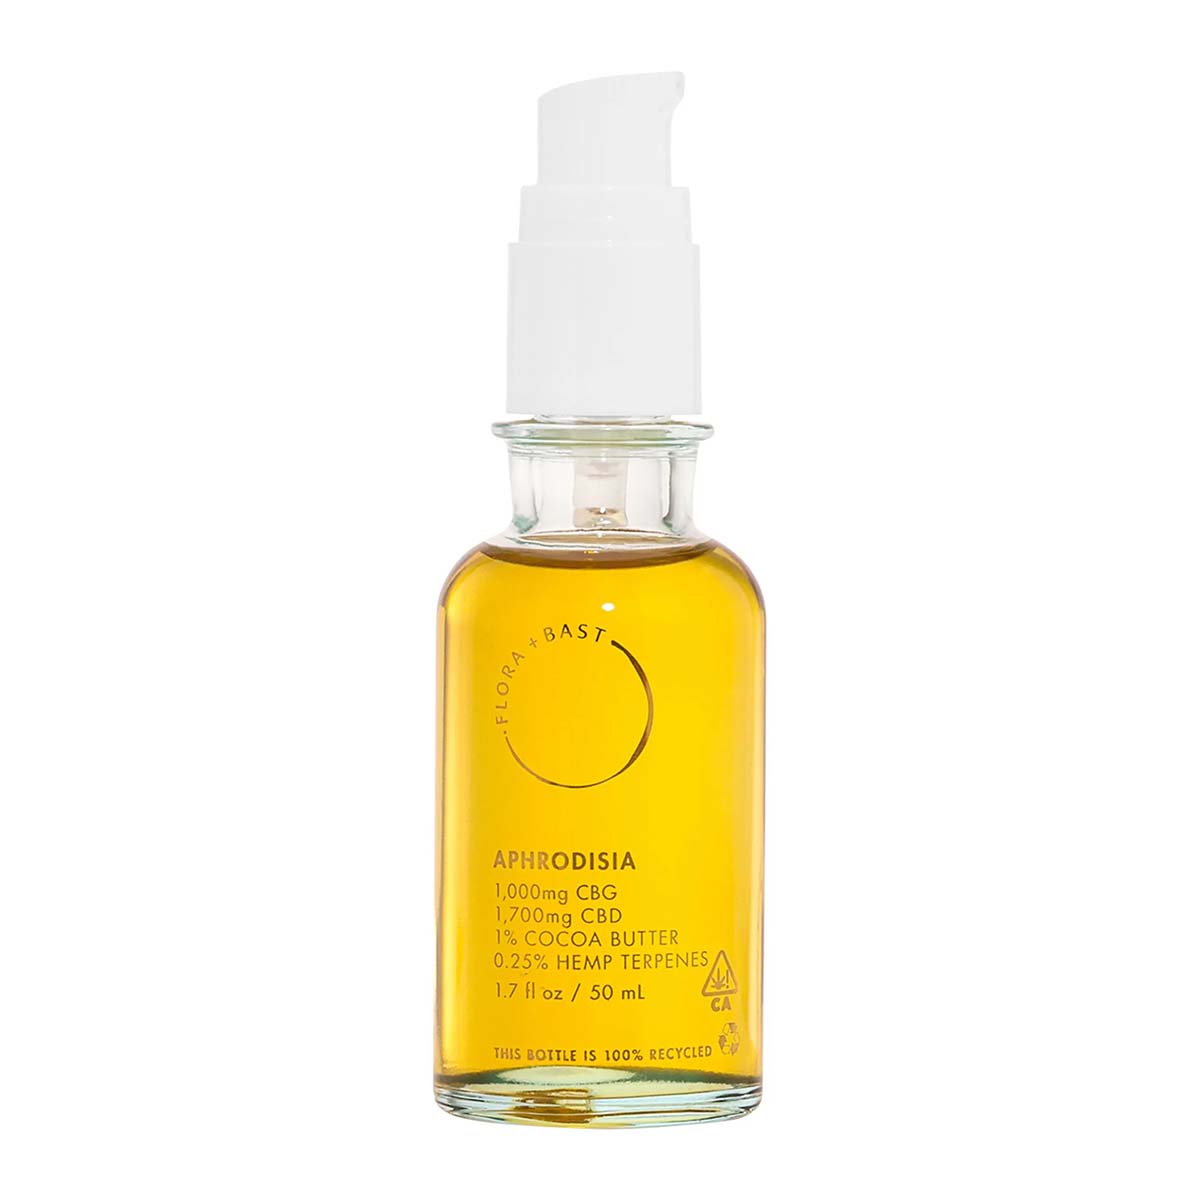 A head on product shot of a bottle of Flora + Bast APHRODISIA oil.